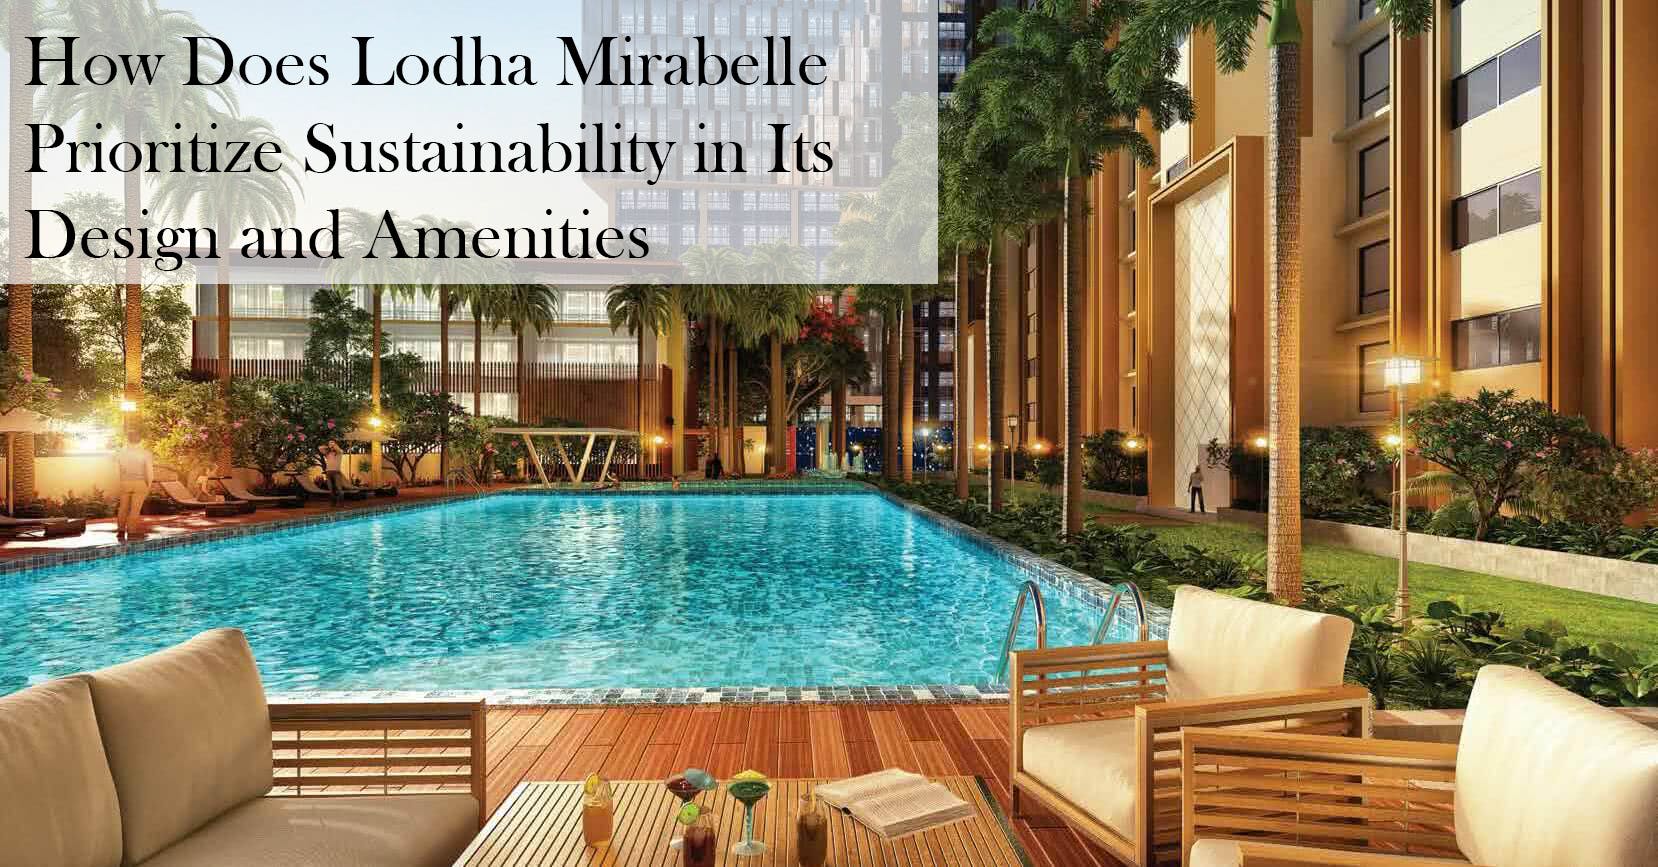 How Does Lodha Mirabelle Prioritize Sustainability in Its Design and Amenities